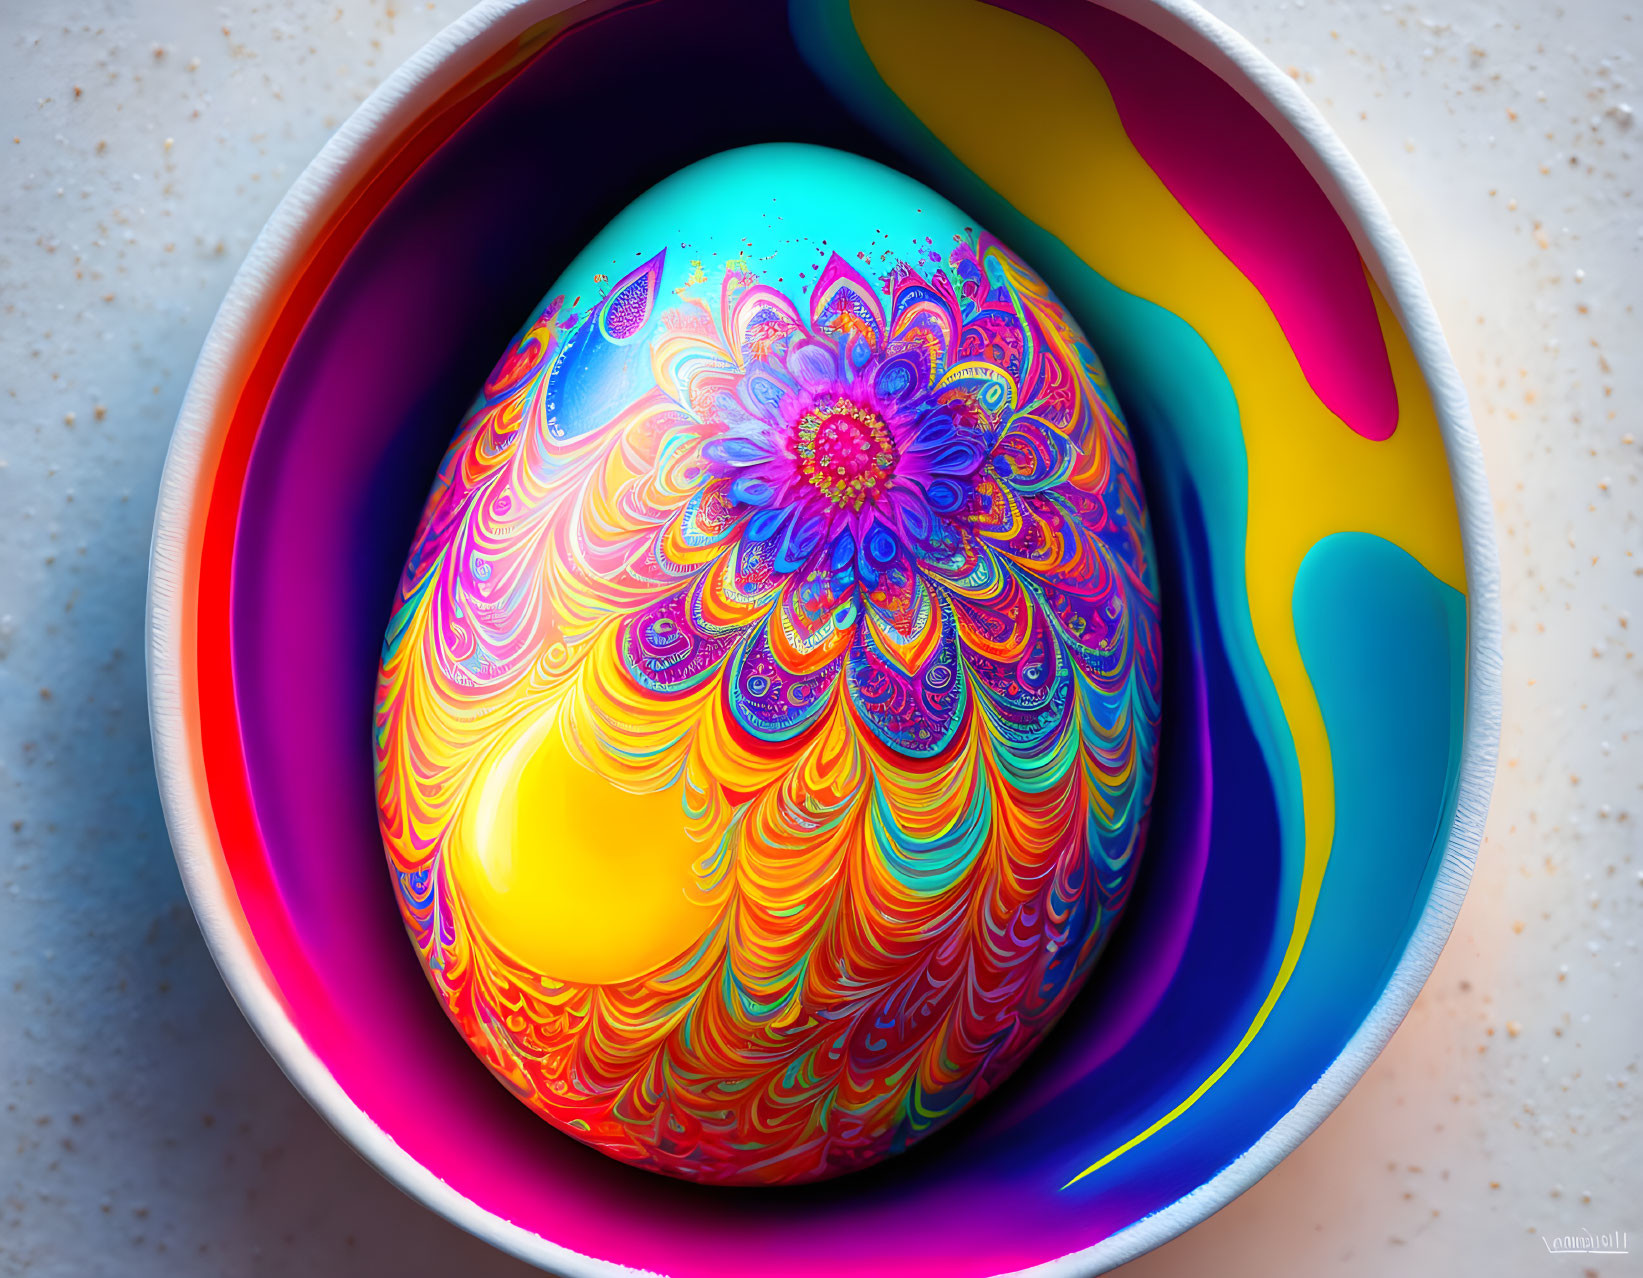 Colorful 3D Egg Illustration in Wavy-Lined Bowl